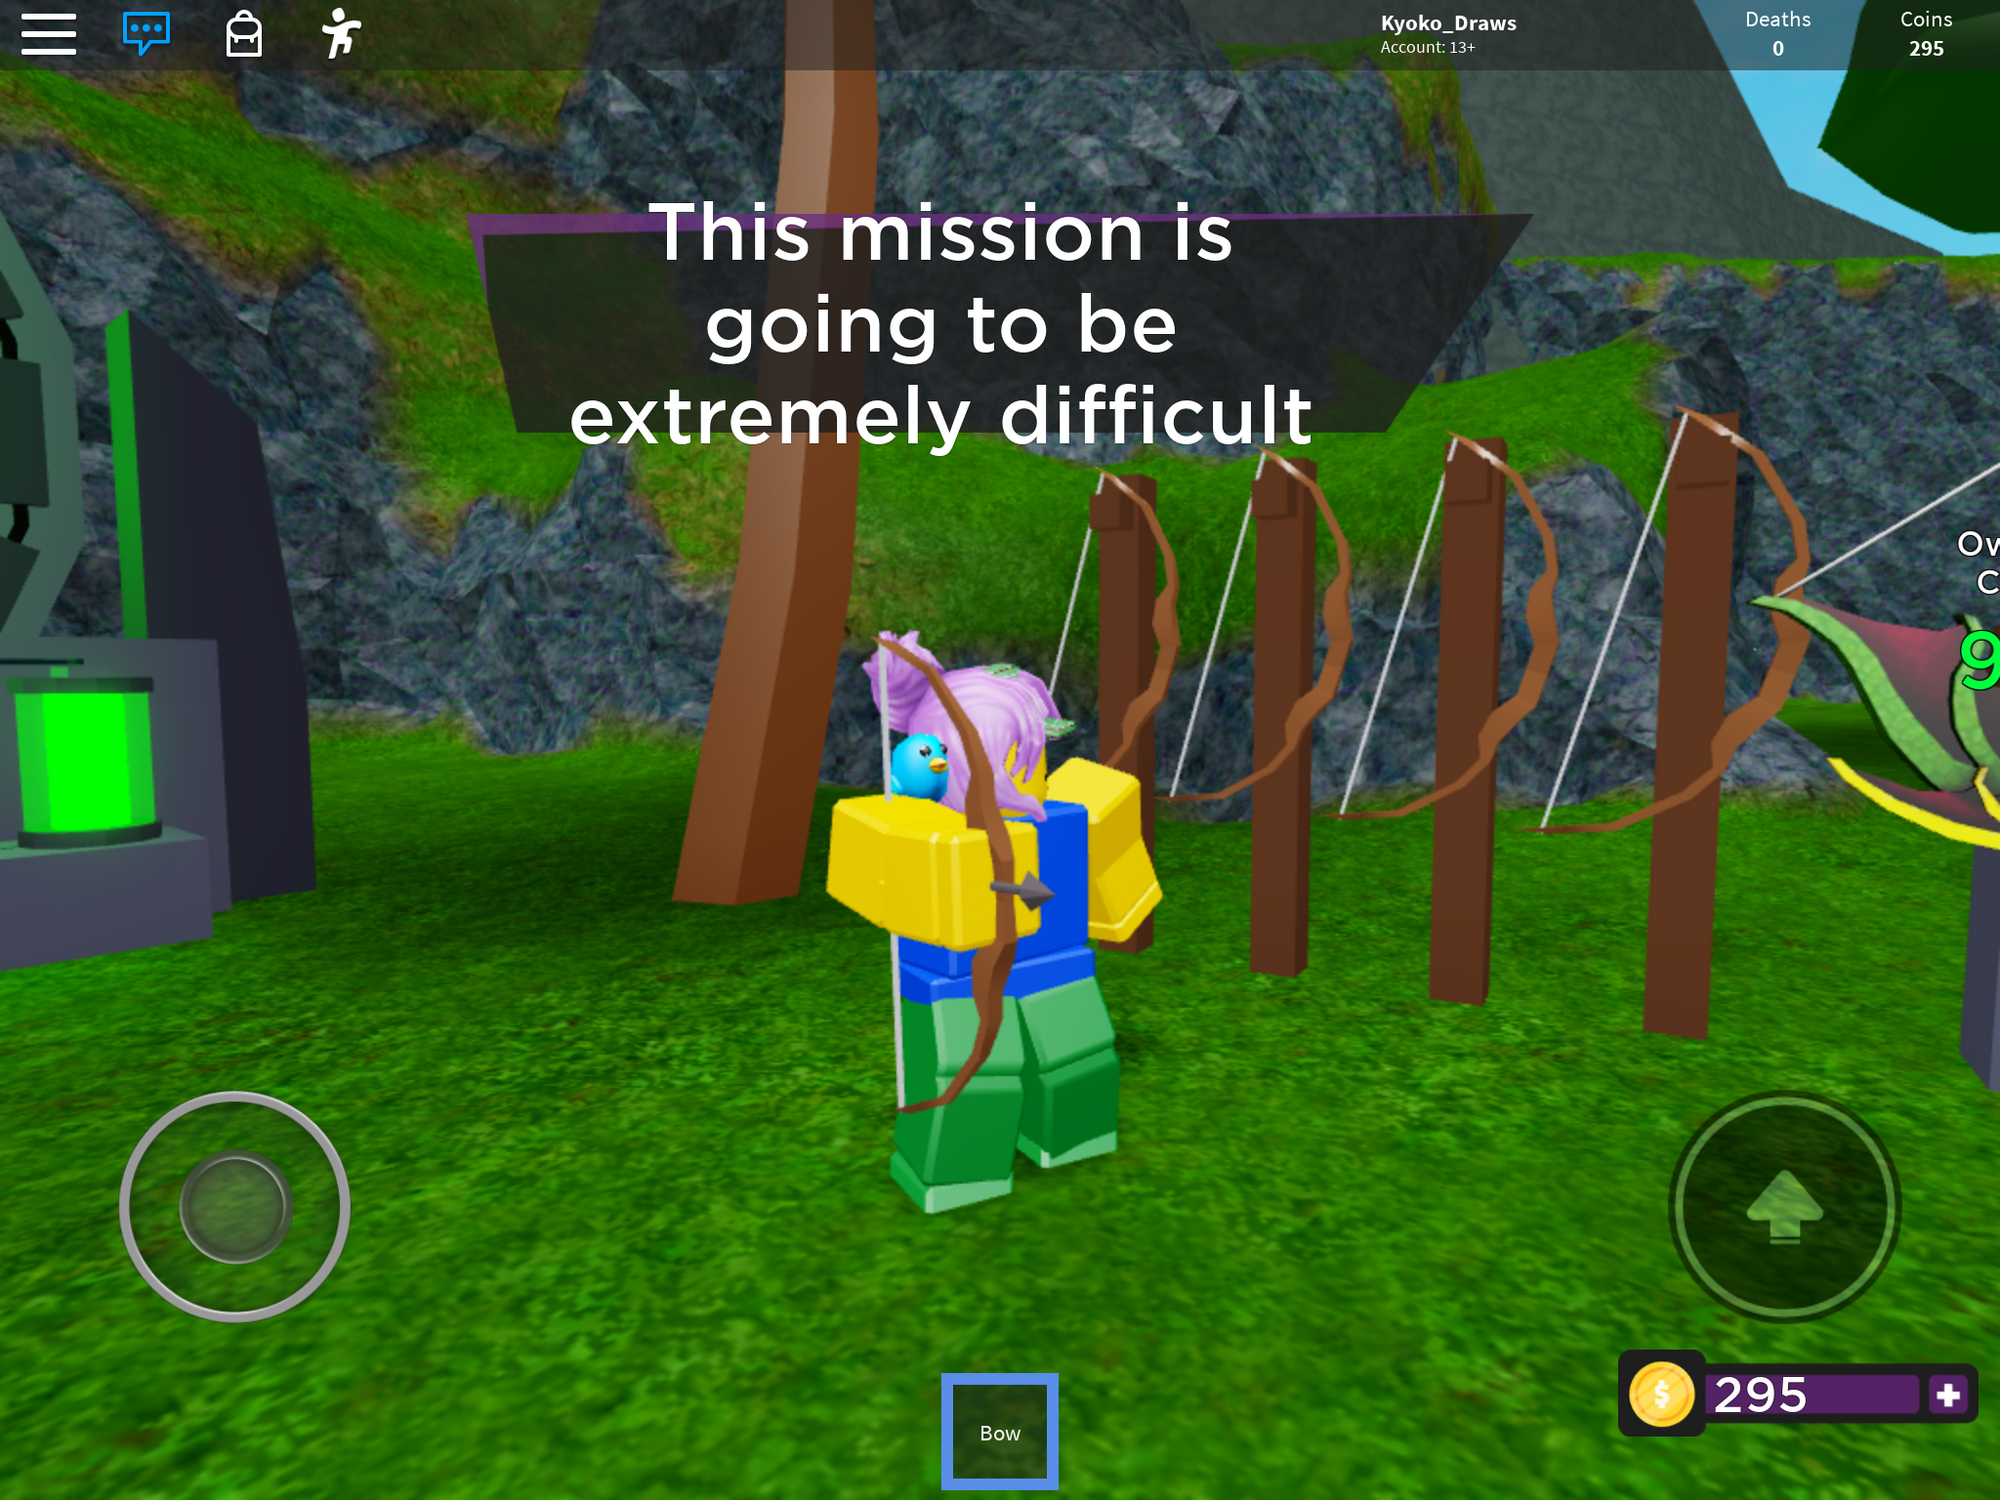 Timetraveladventuresrobloxwiki Div Class Tab Content Div Id Tab 5 Data Appns Serp Data K 5325 1 Role Tabpanel Aria Labelledby Tab 5 Head Data Priority Ul Class B Vlist B Divsec Li Data Priority Div Different Users Have Access To Different - video technical difficulties wikia places do roblox fandom